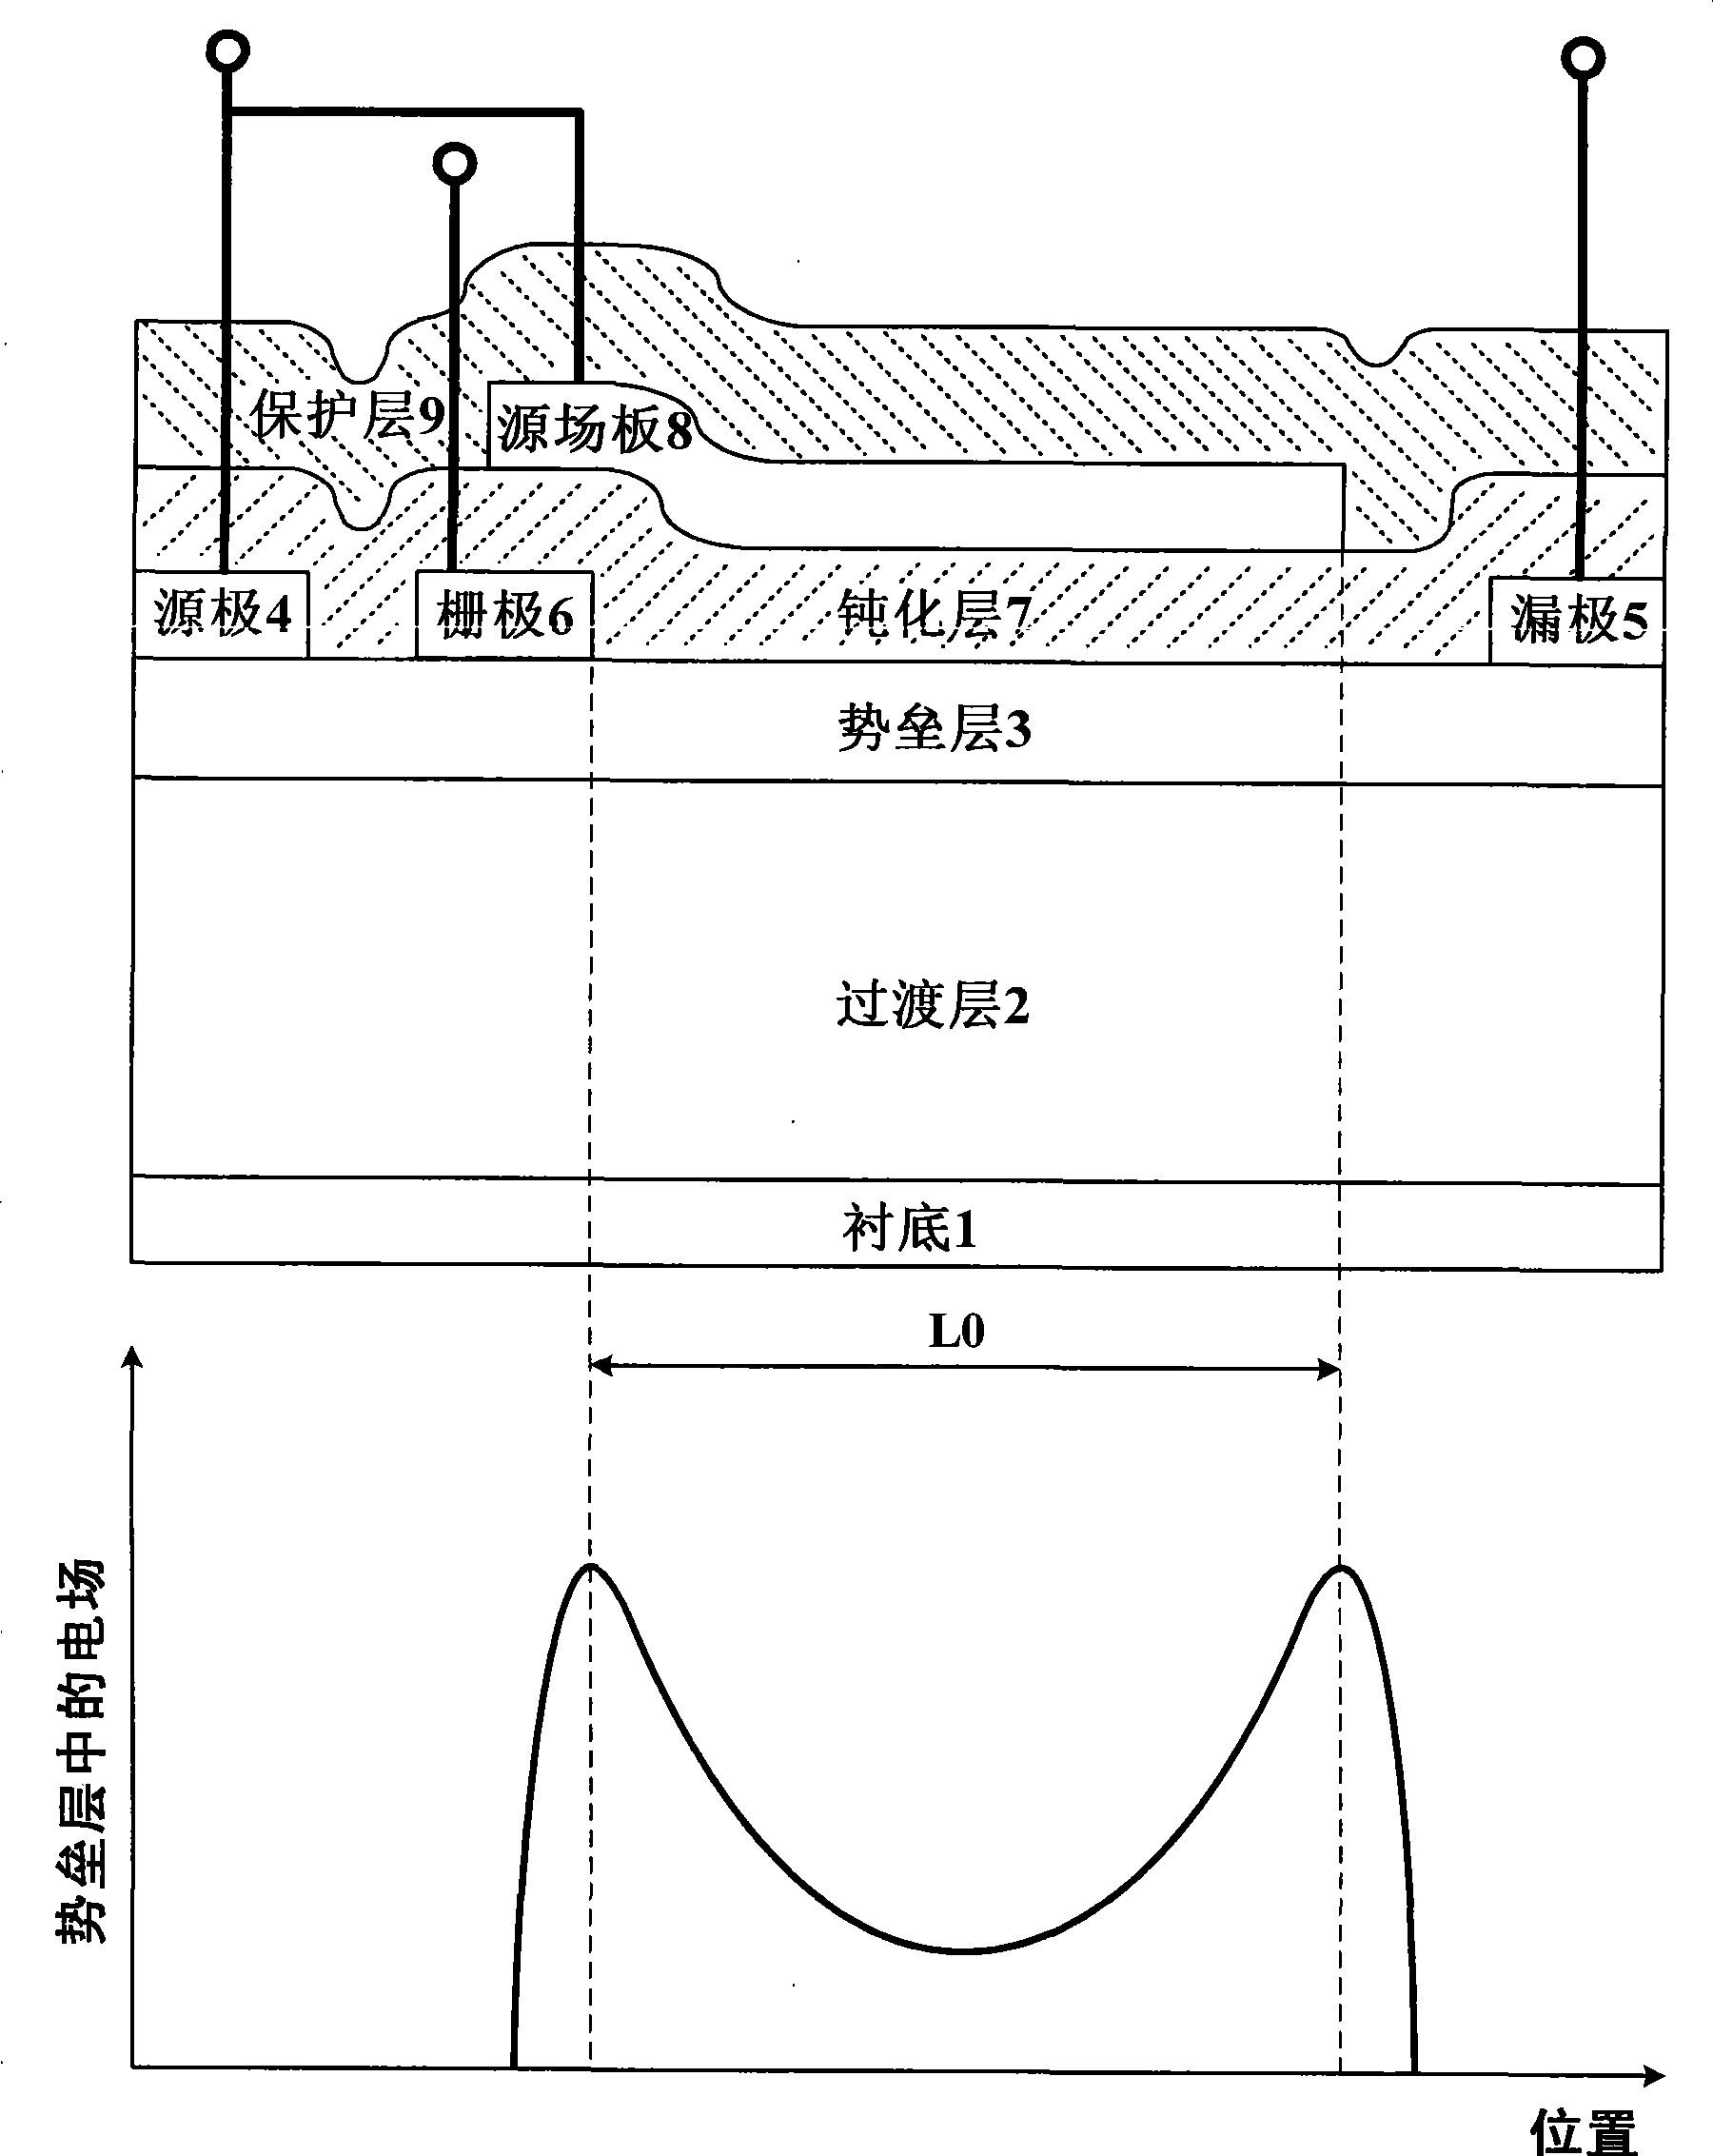 Source field plate transistor with high electron mobility